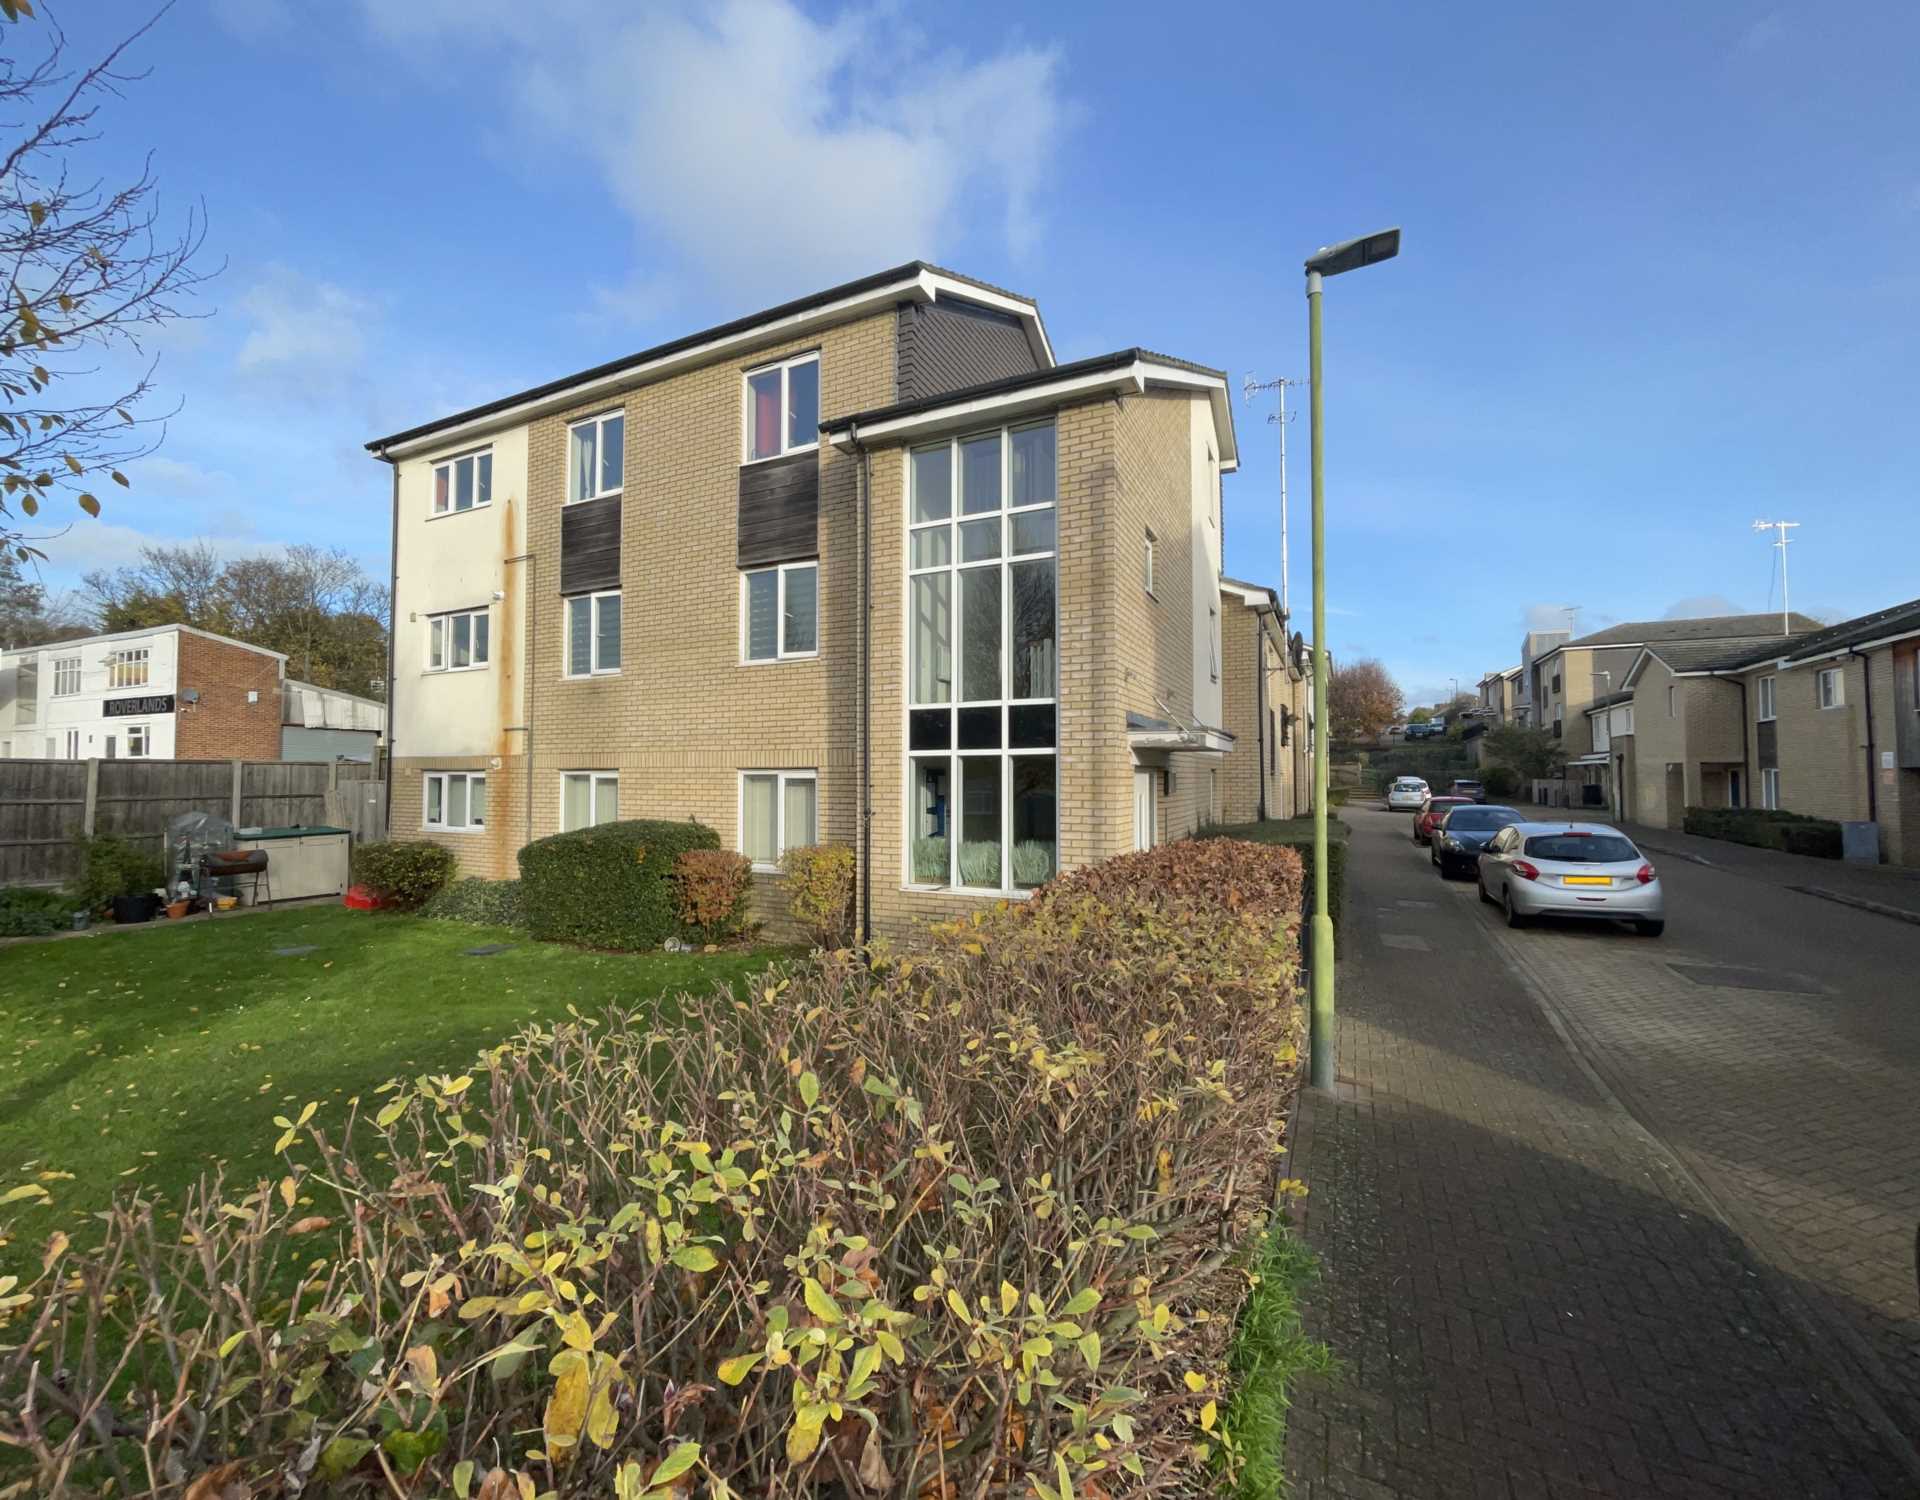 Harkness Road, Hemel Hempstead, Unfurnished, Available Now, Image 4